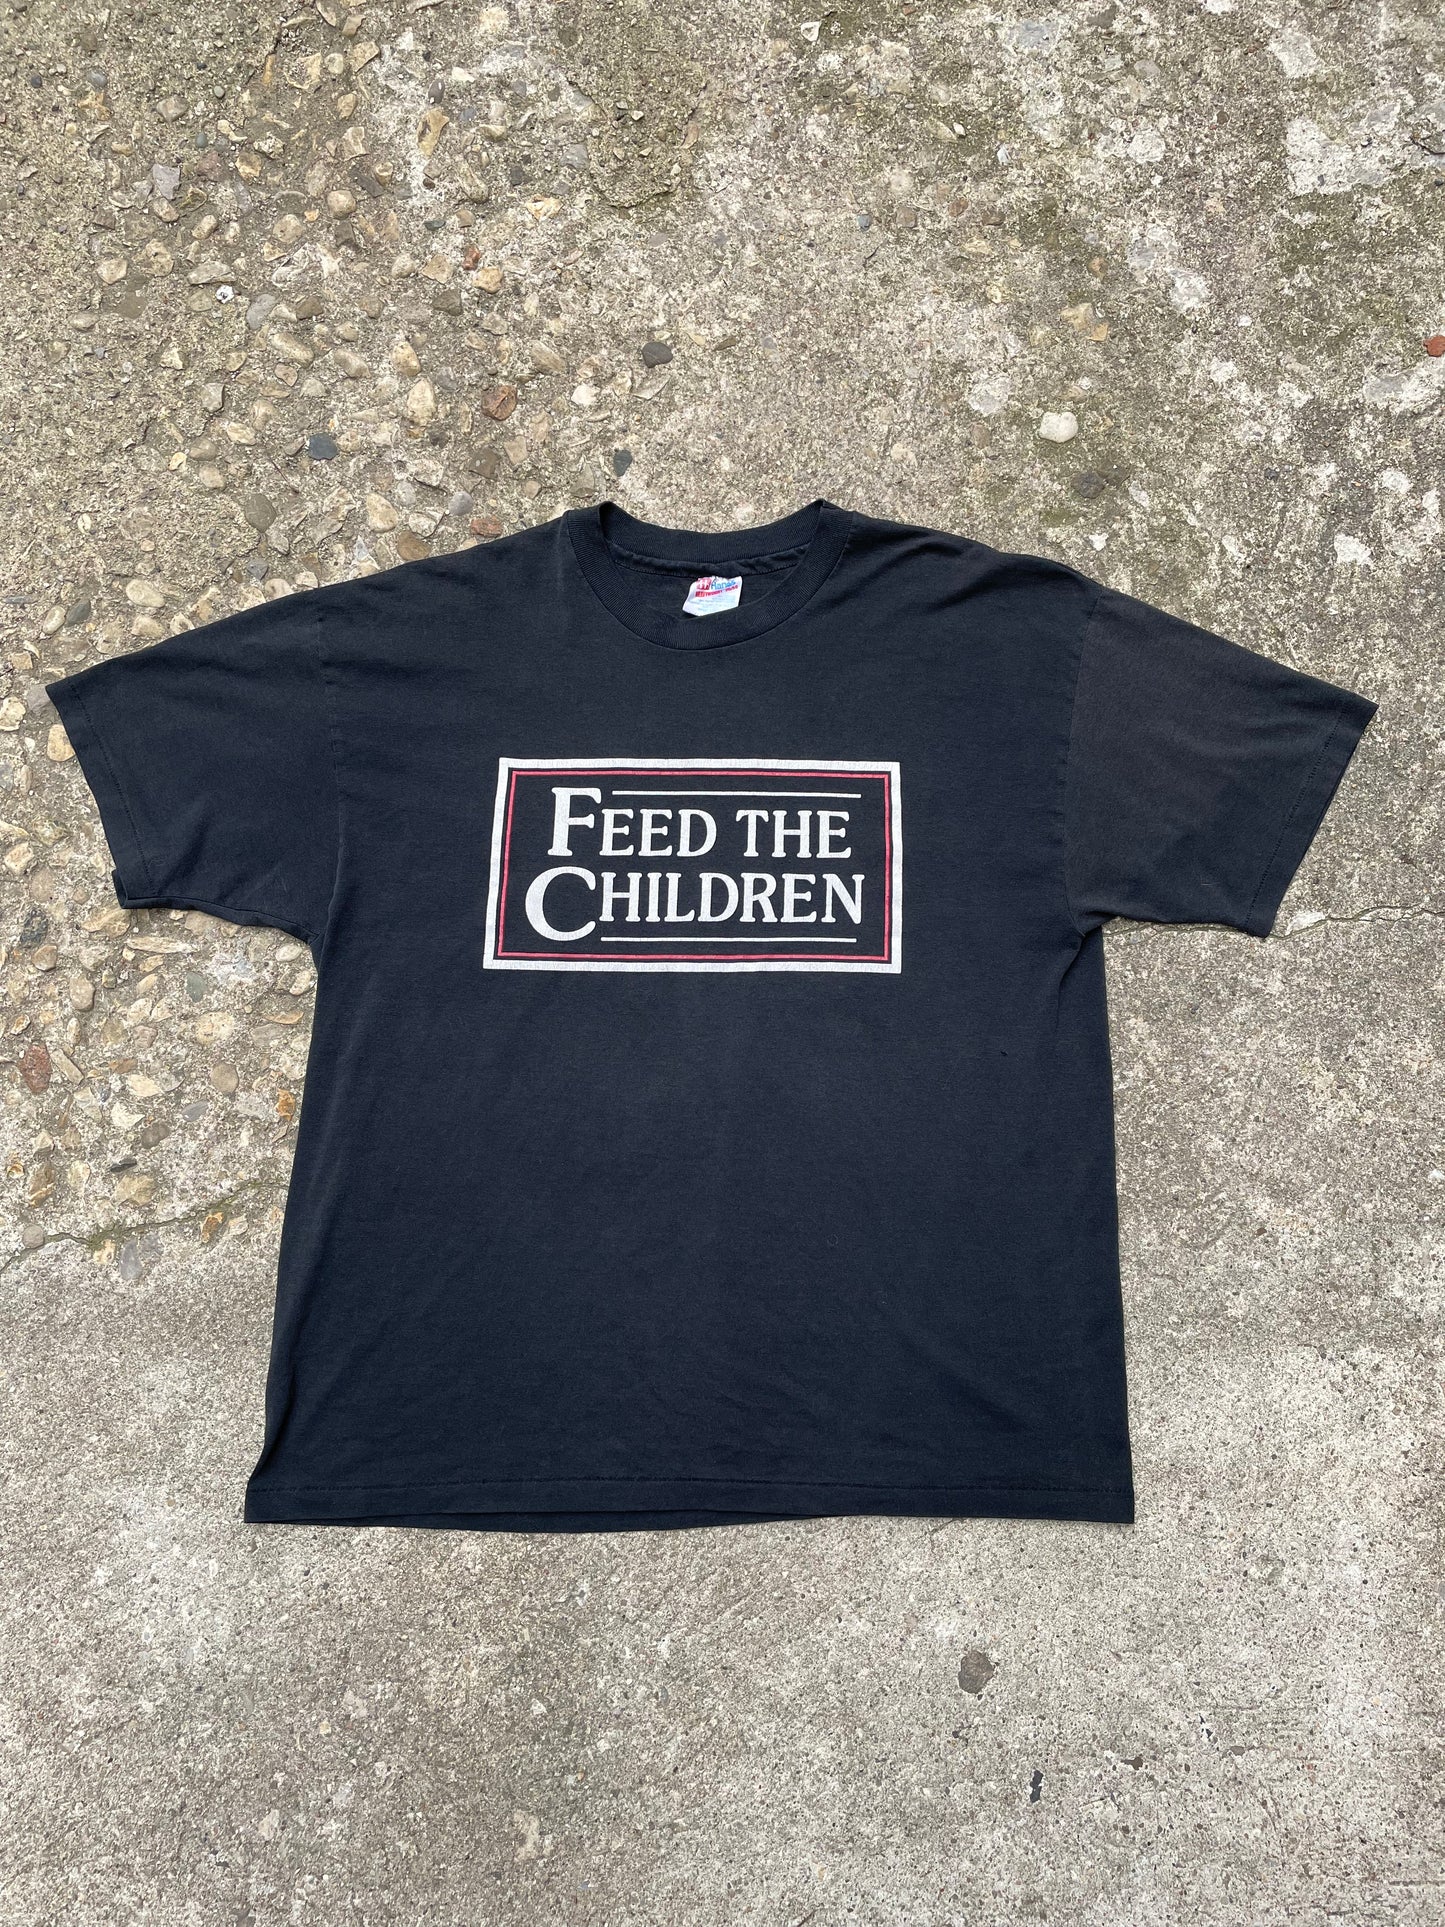 1990's 'Feed the Children' Graphic T-Shirt - XL